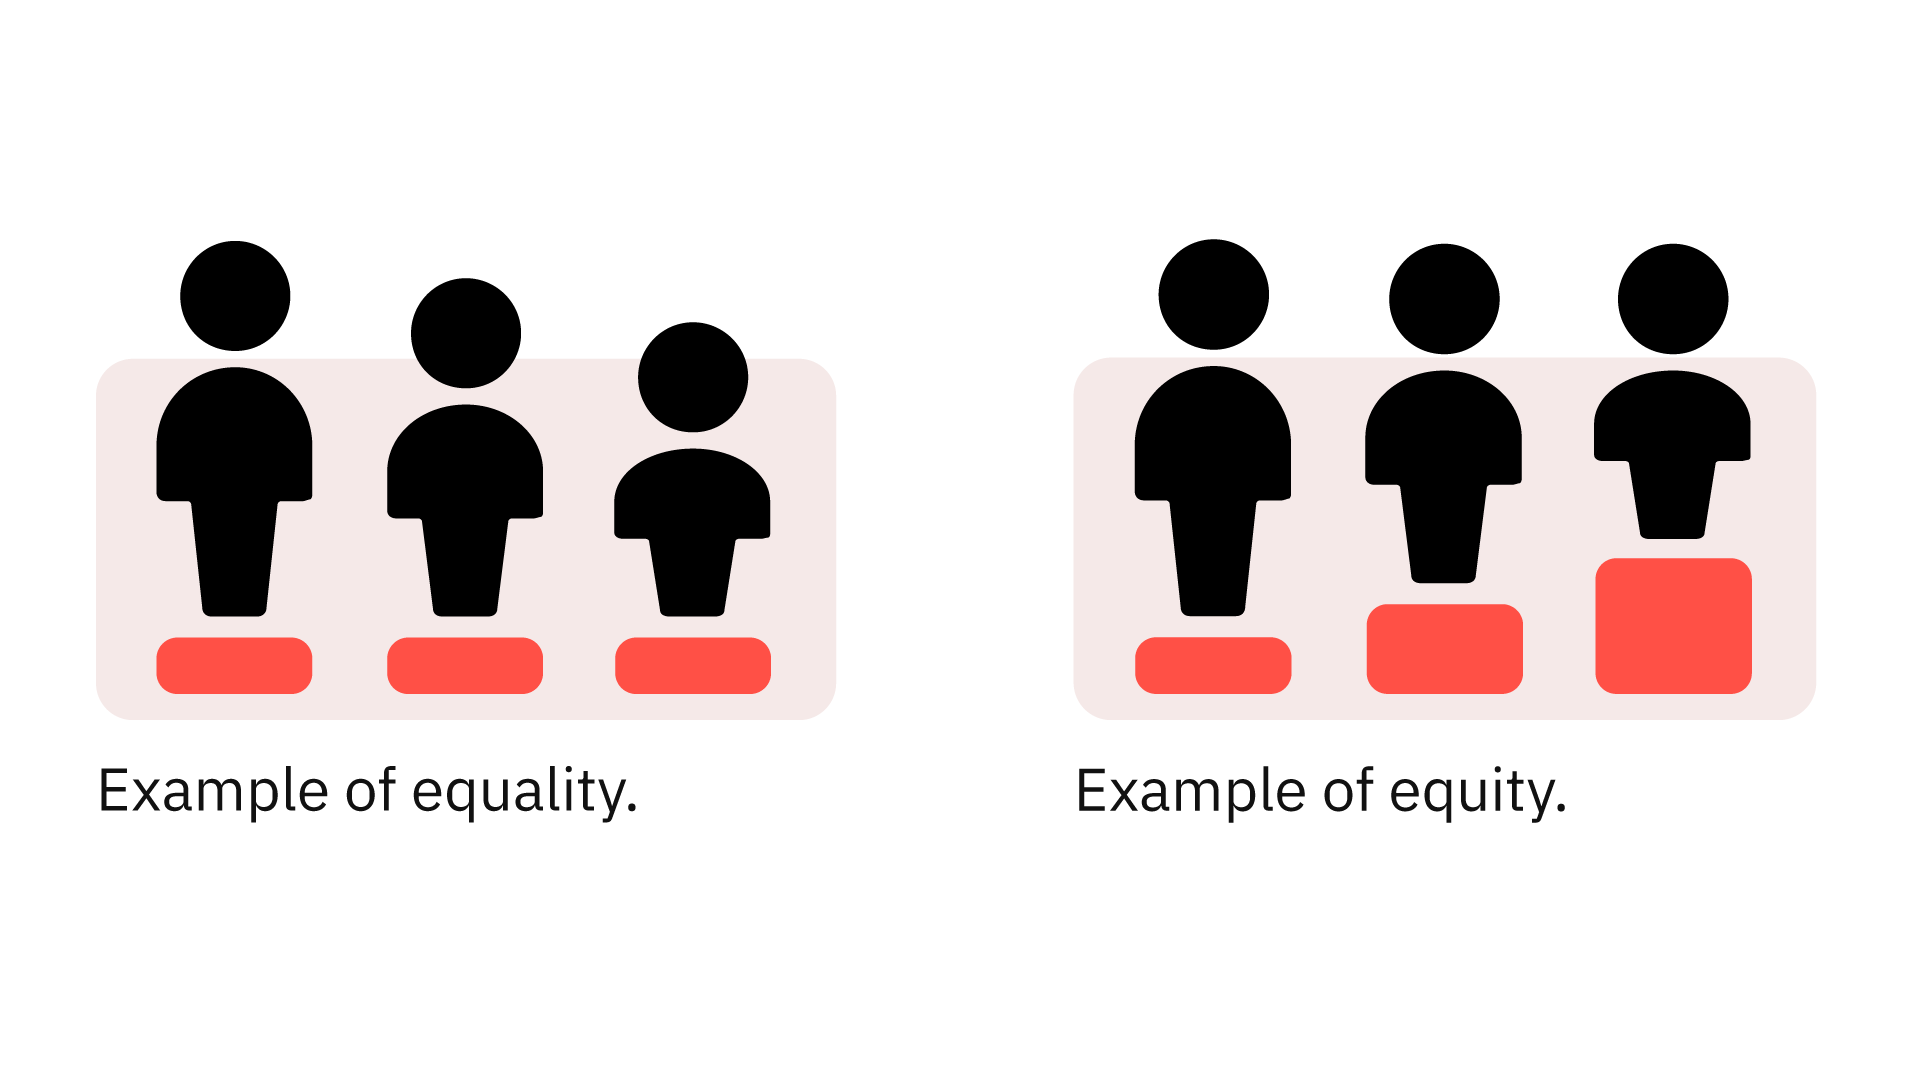 Comparison of equality and equity